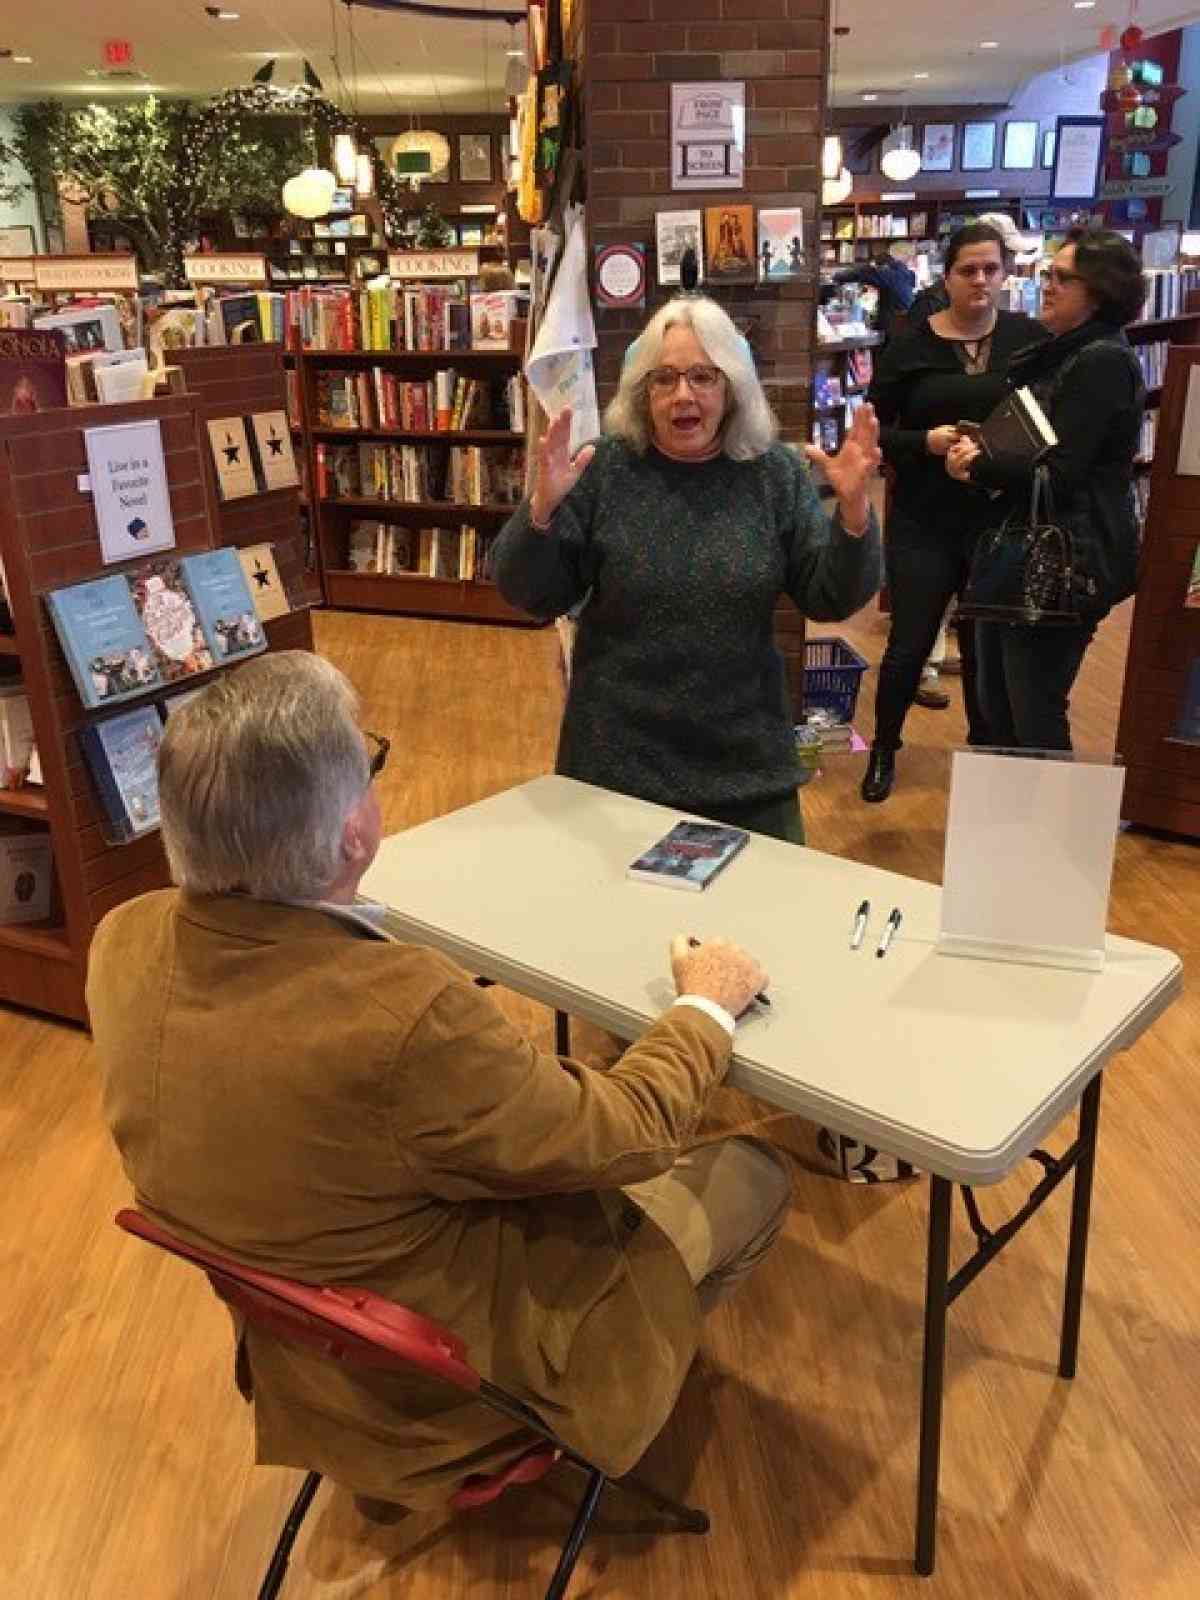 Ira-David-Wood-III-Attended-Book-Signing-Event-For-‘The-Russian-Galatea’-austin-macauley-publishers